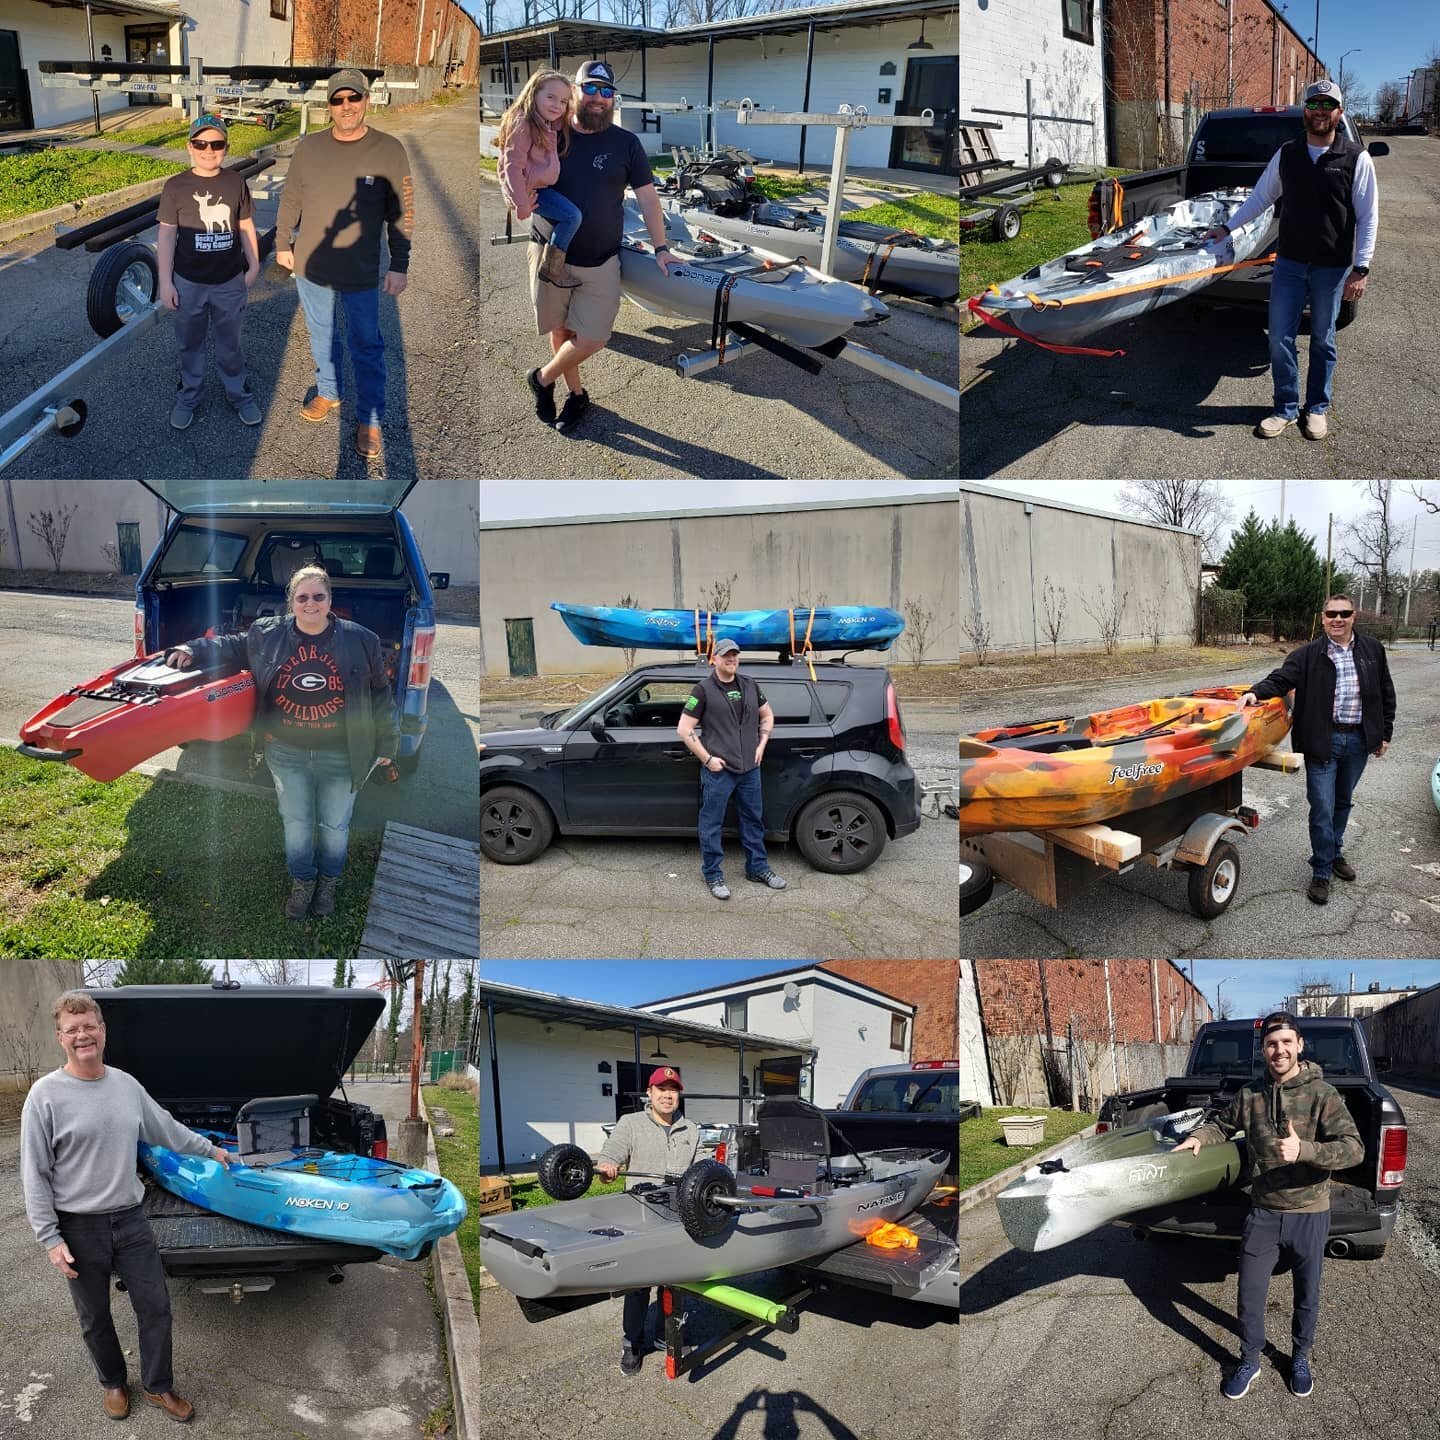 We love seeing all these happy faces! Kayak season is in full swing here at the shop. Come by and let us show you what everyone is smiling about :) #westbrooksupplyco #HappyPaddlers